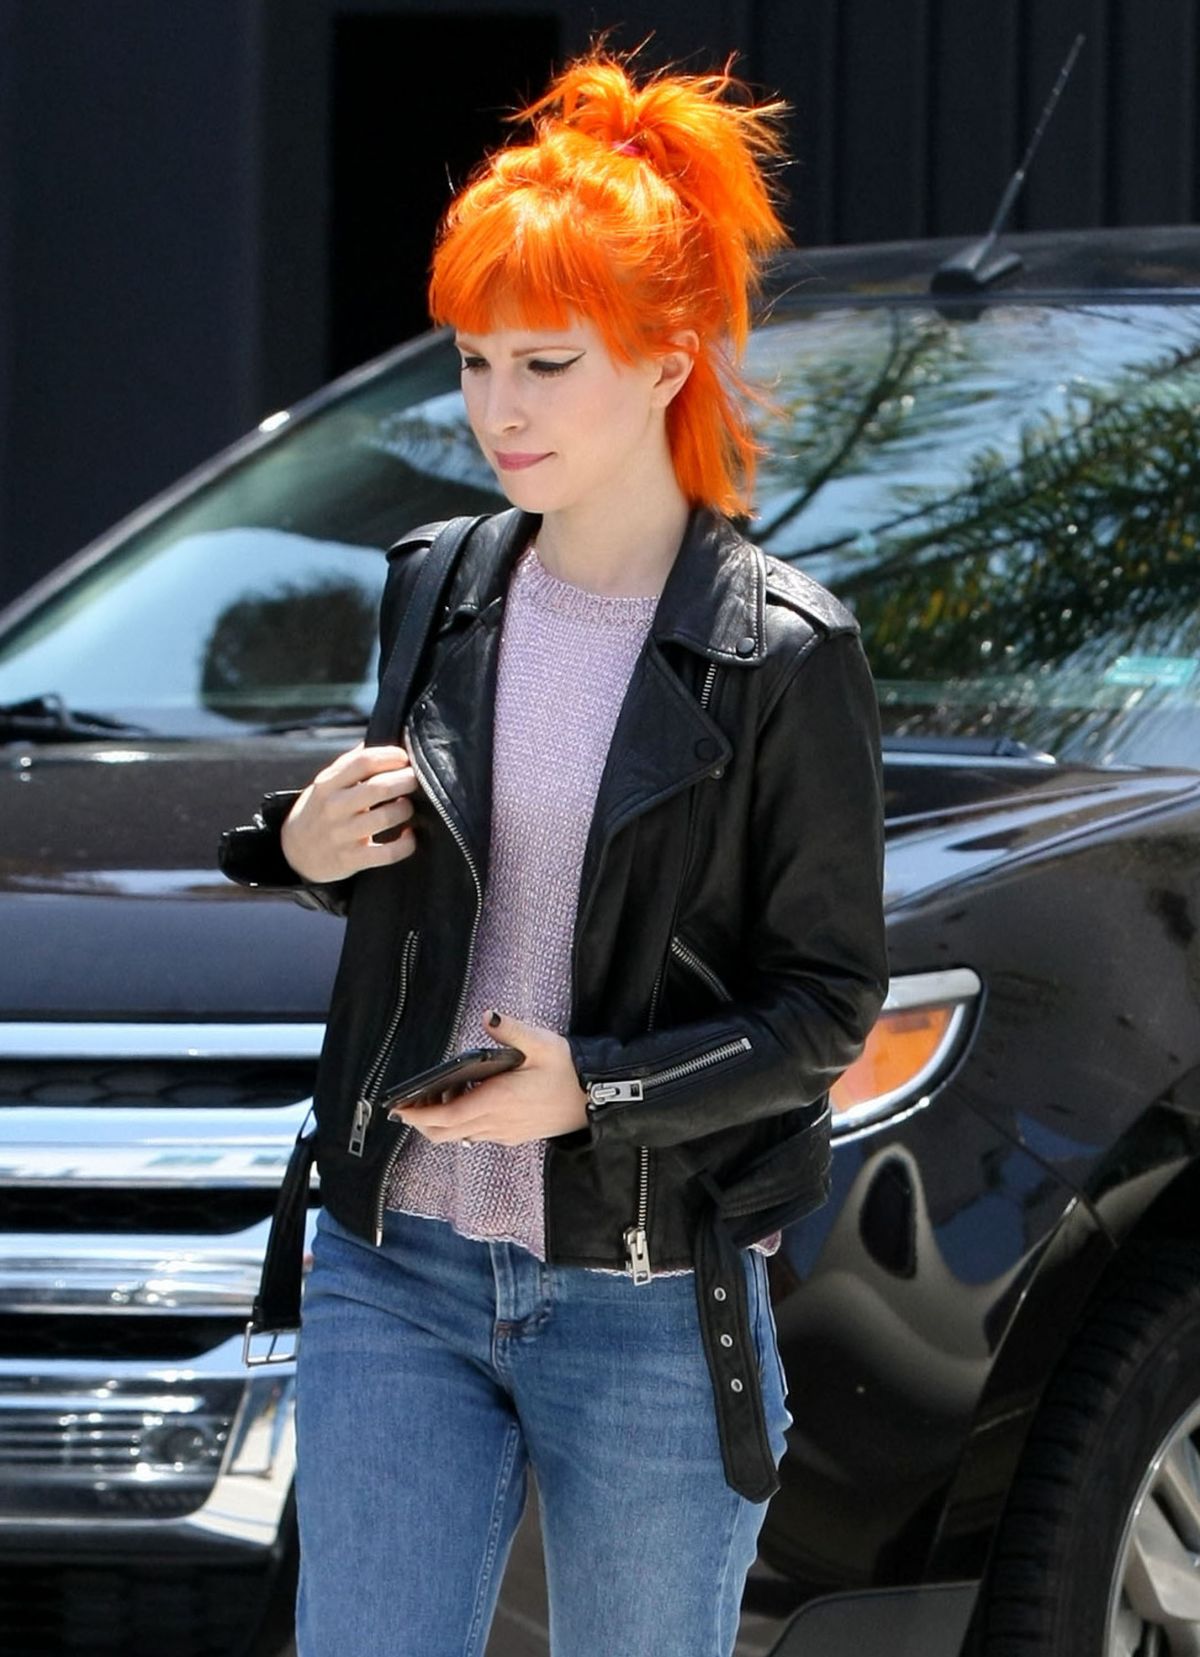 HAYLEY WILLIAMS Out and About in Los Angeles 05/23/2015